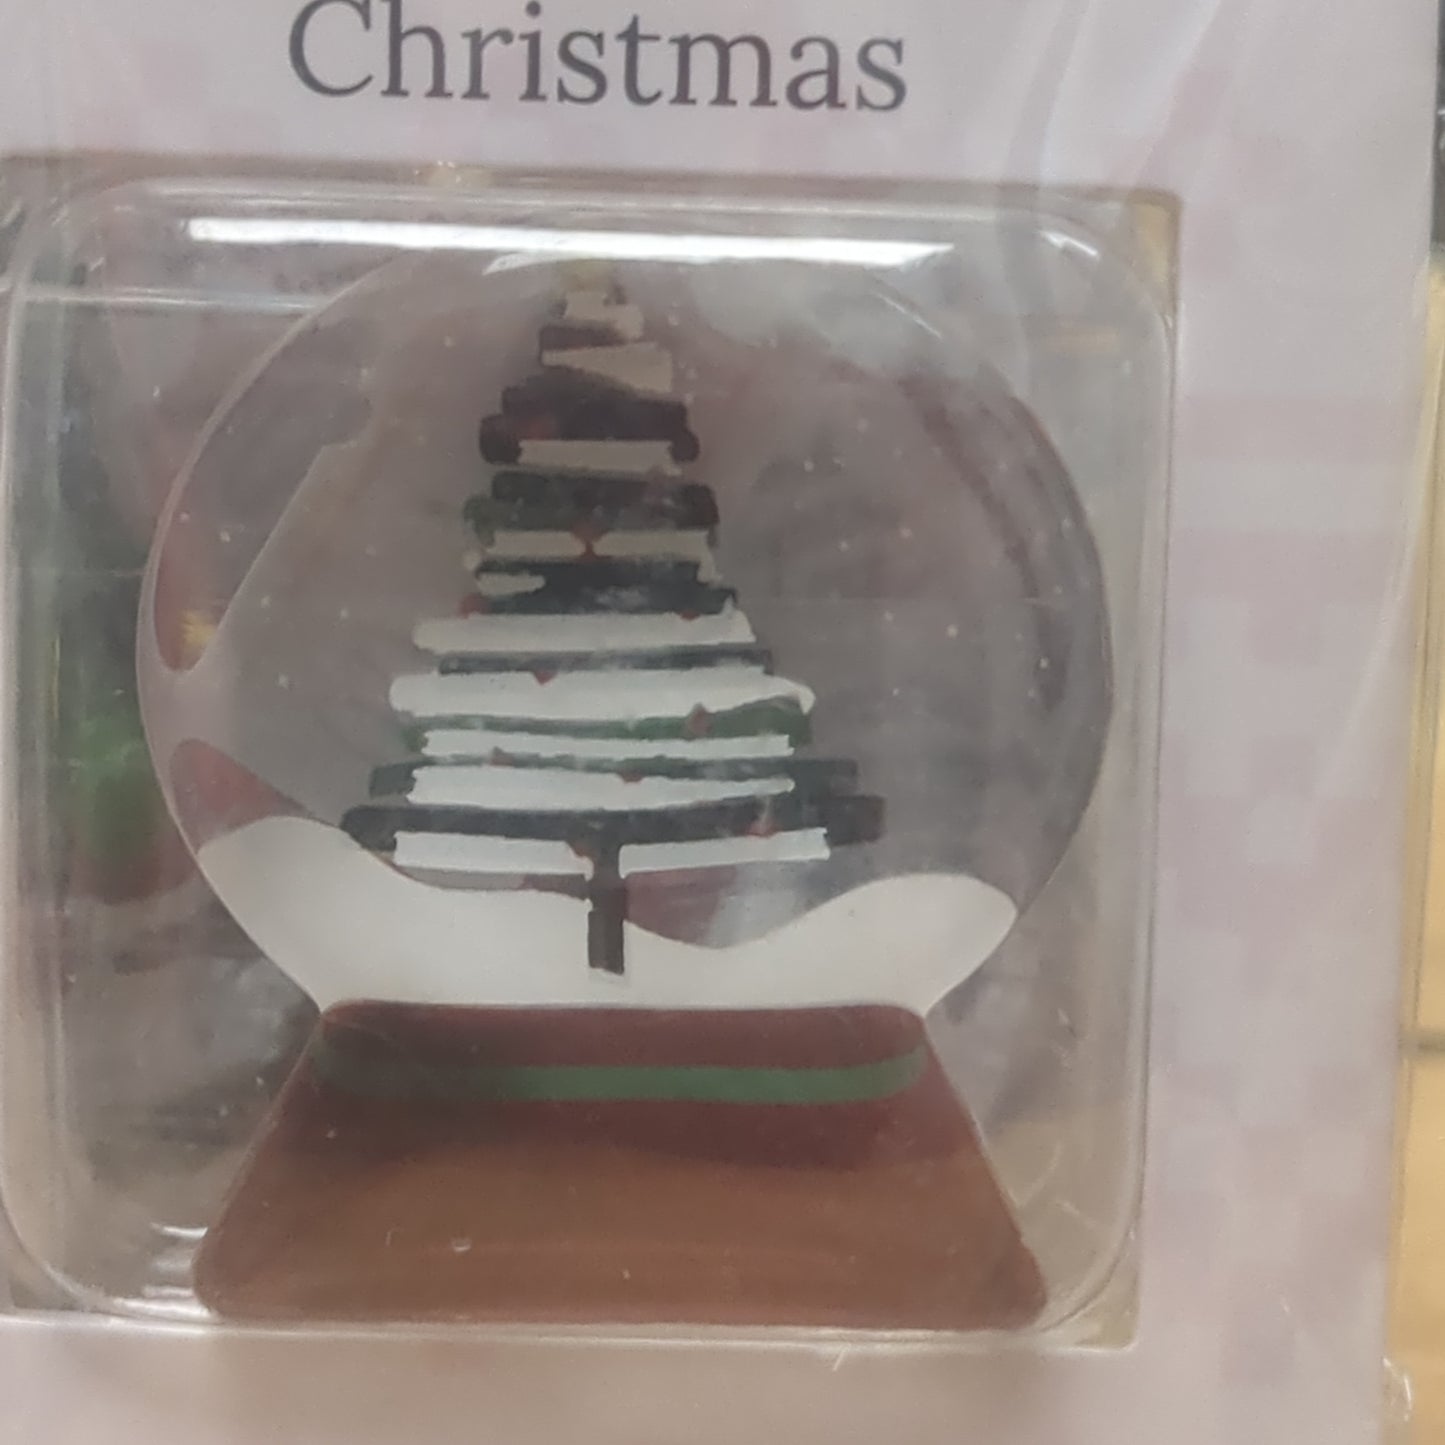 Pocket charm snow globe appearance with tree inside. Have yourself a Merry Little Christmas